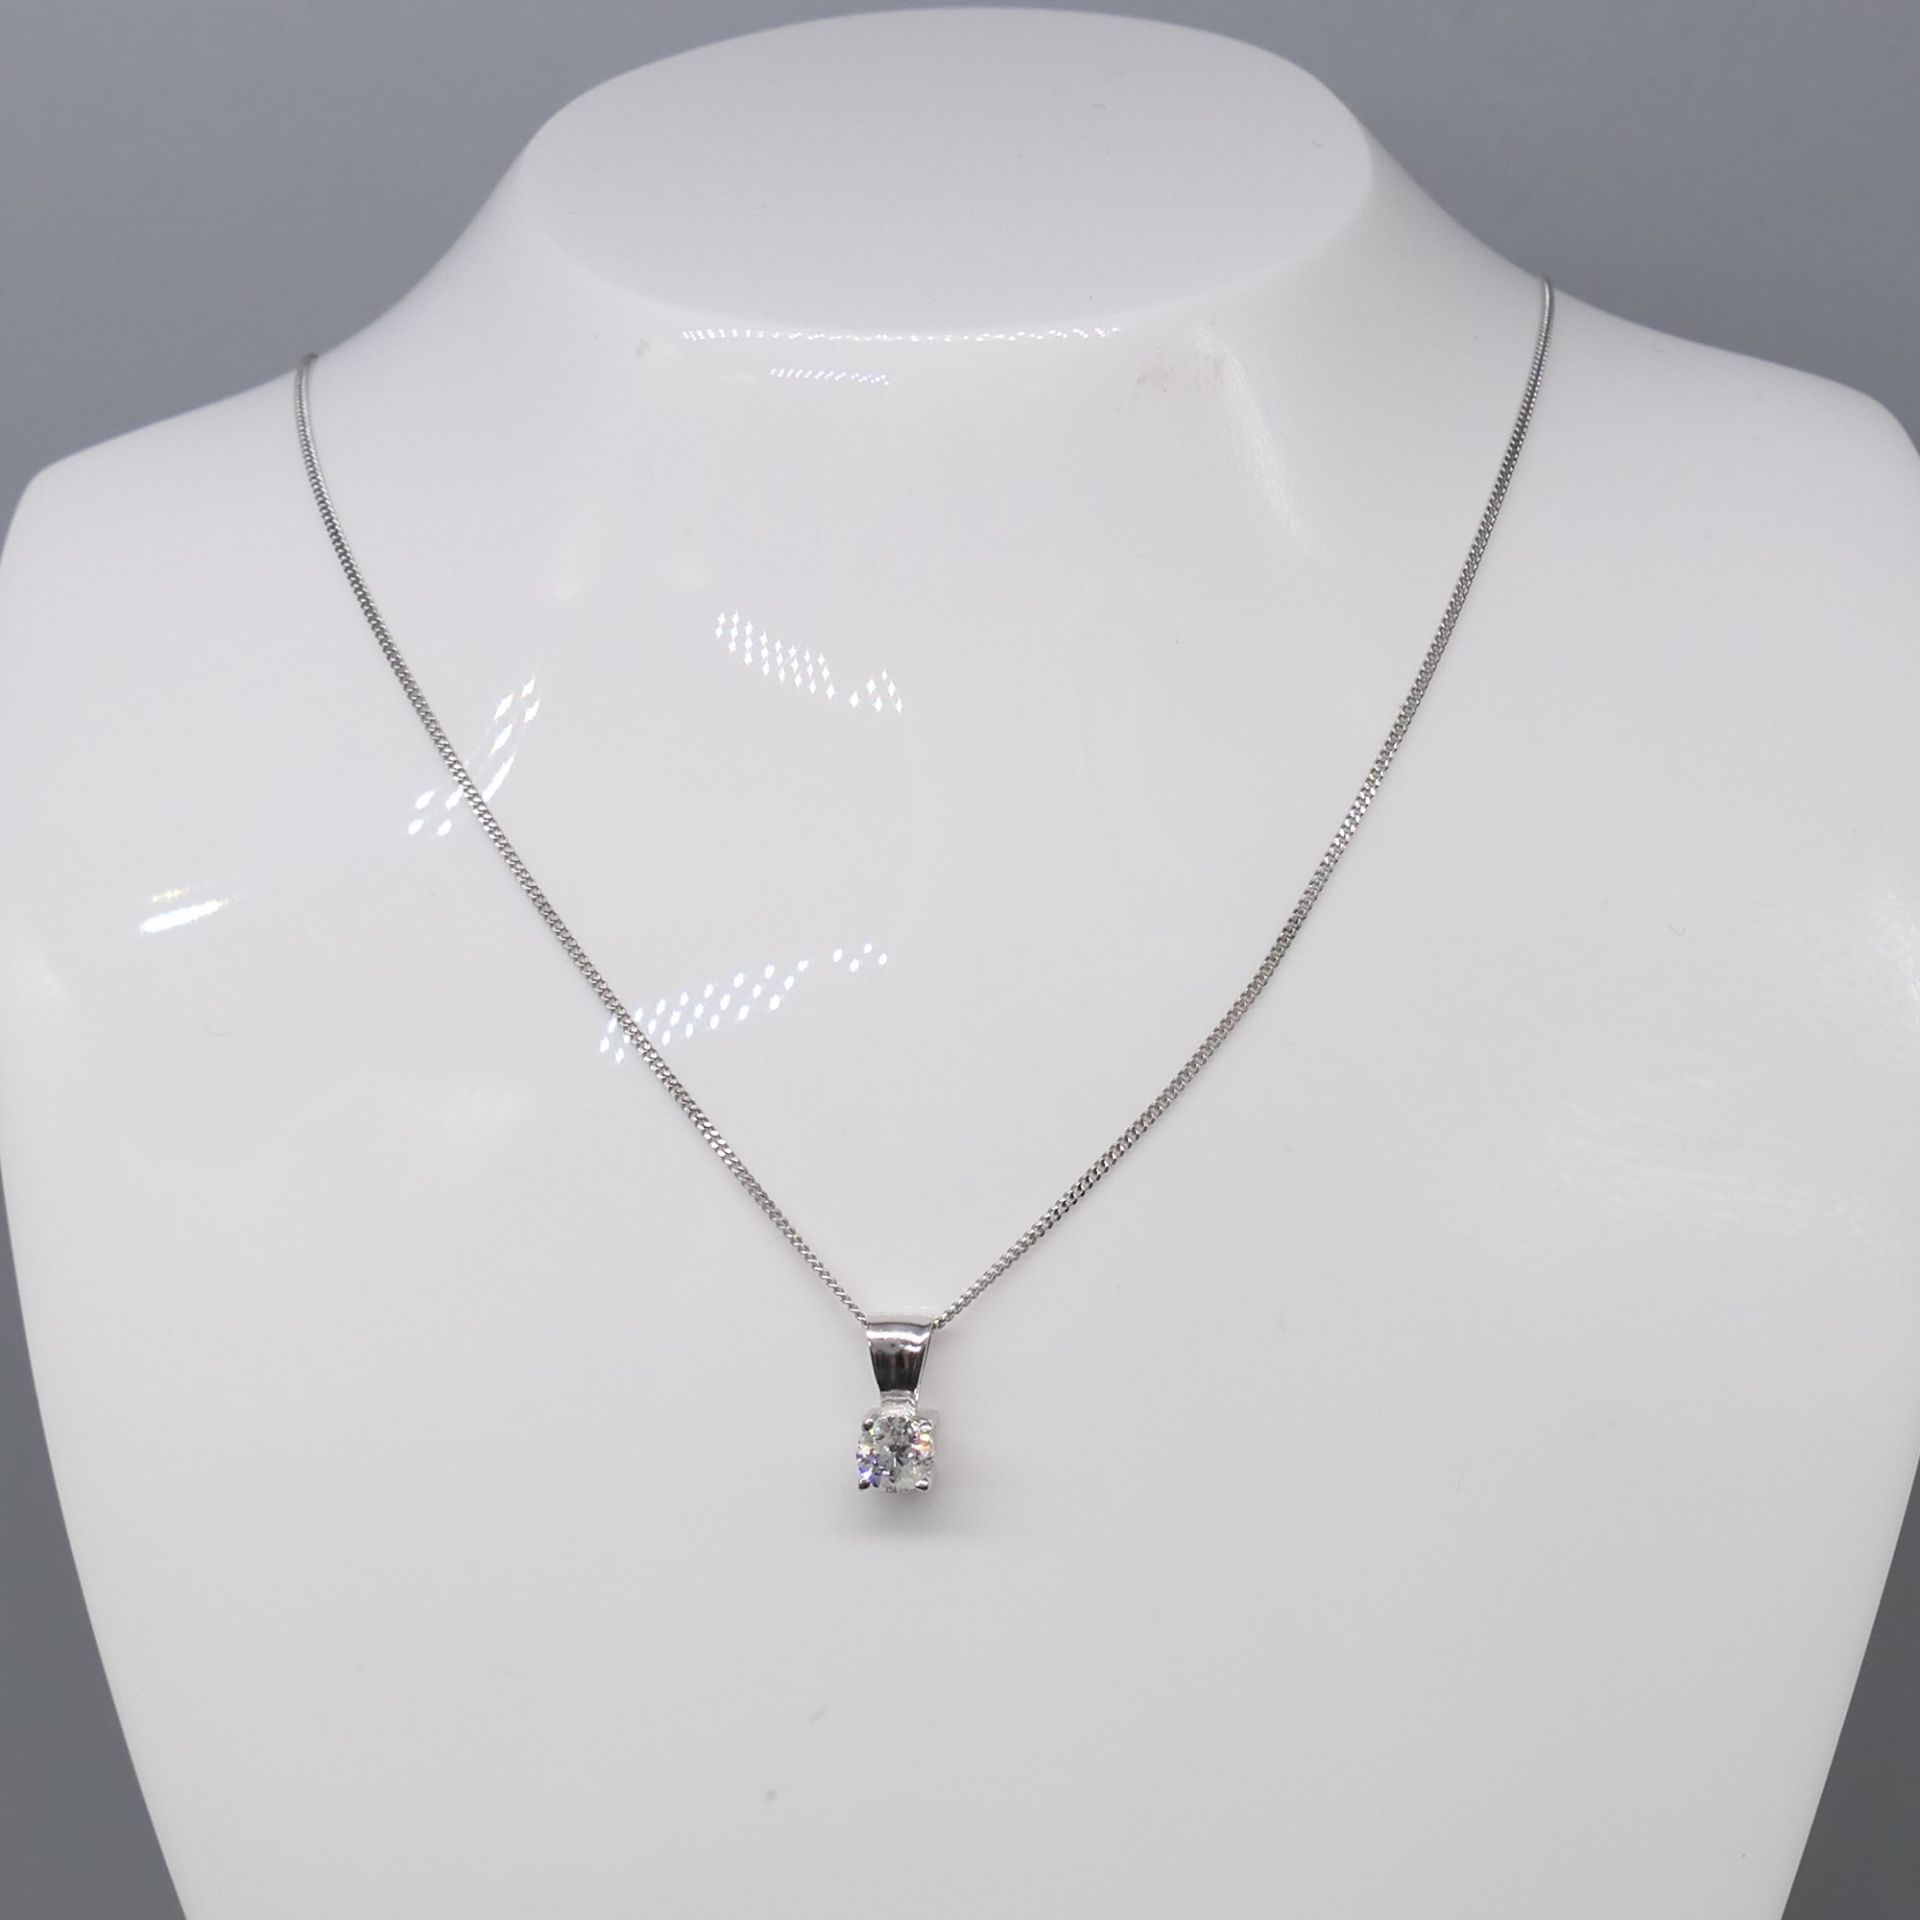 0.15 Carat Diamond Solitaire Necklace In White Gold, With Magnetic Gifting Box - Image 7 of 8